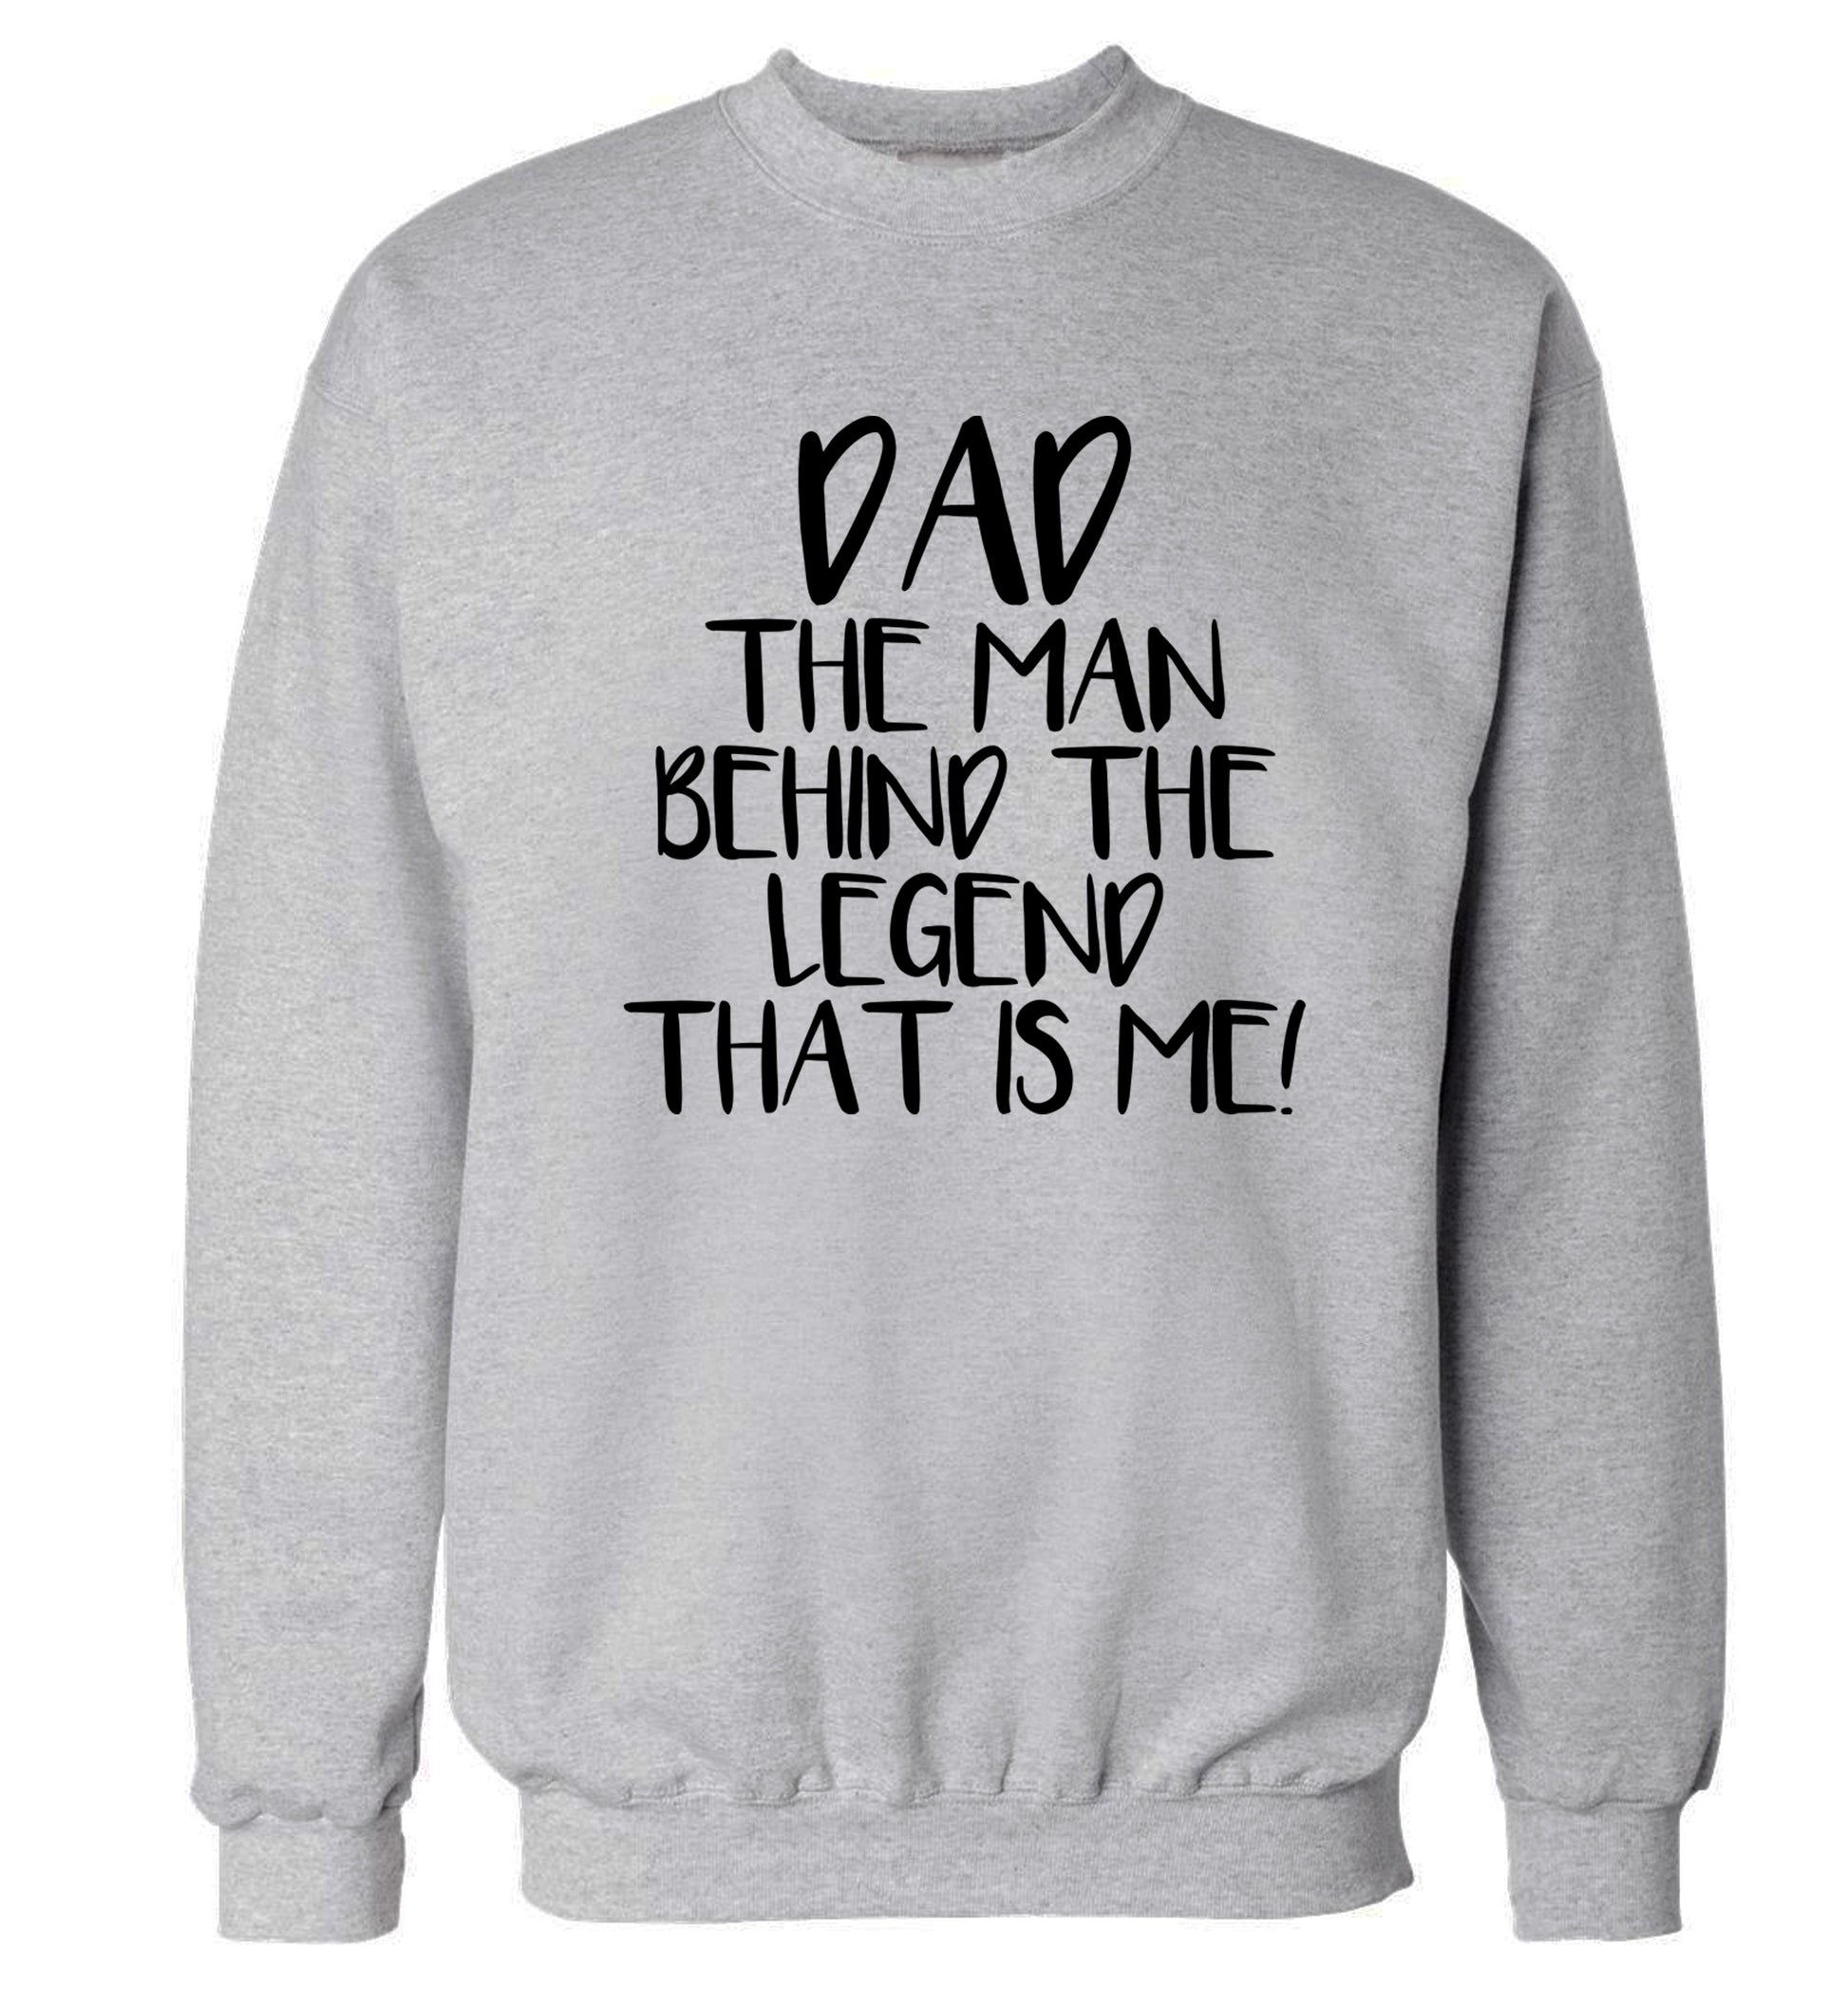 Dad the man behind the legend that is me! Adult's unisex grey Sweater 2XL